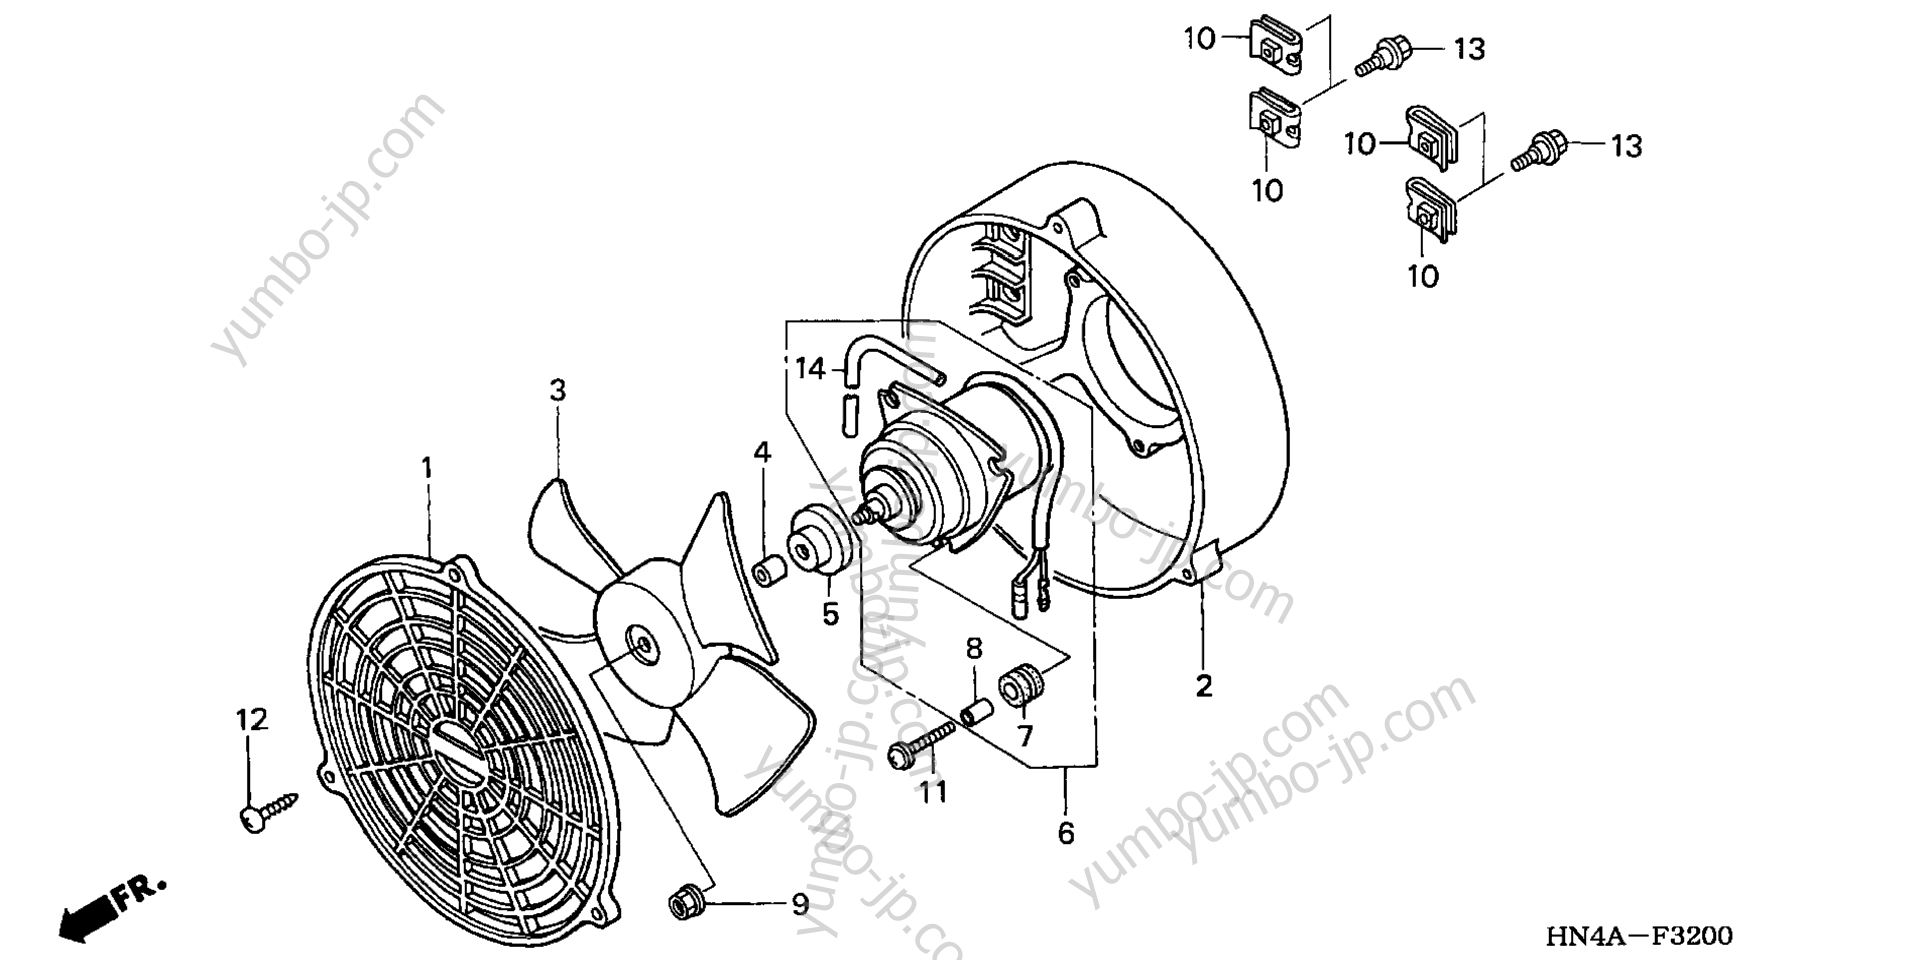 COOLING FAN for ATVs HONDA TRX350FE A 2002 year